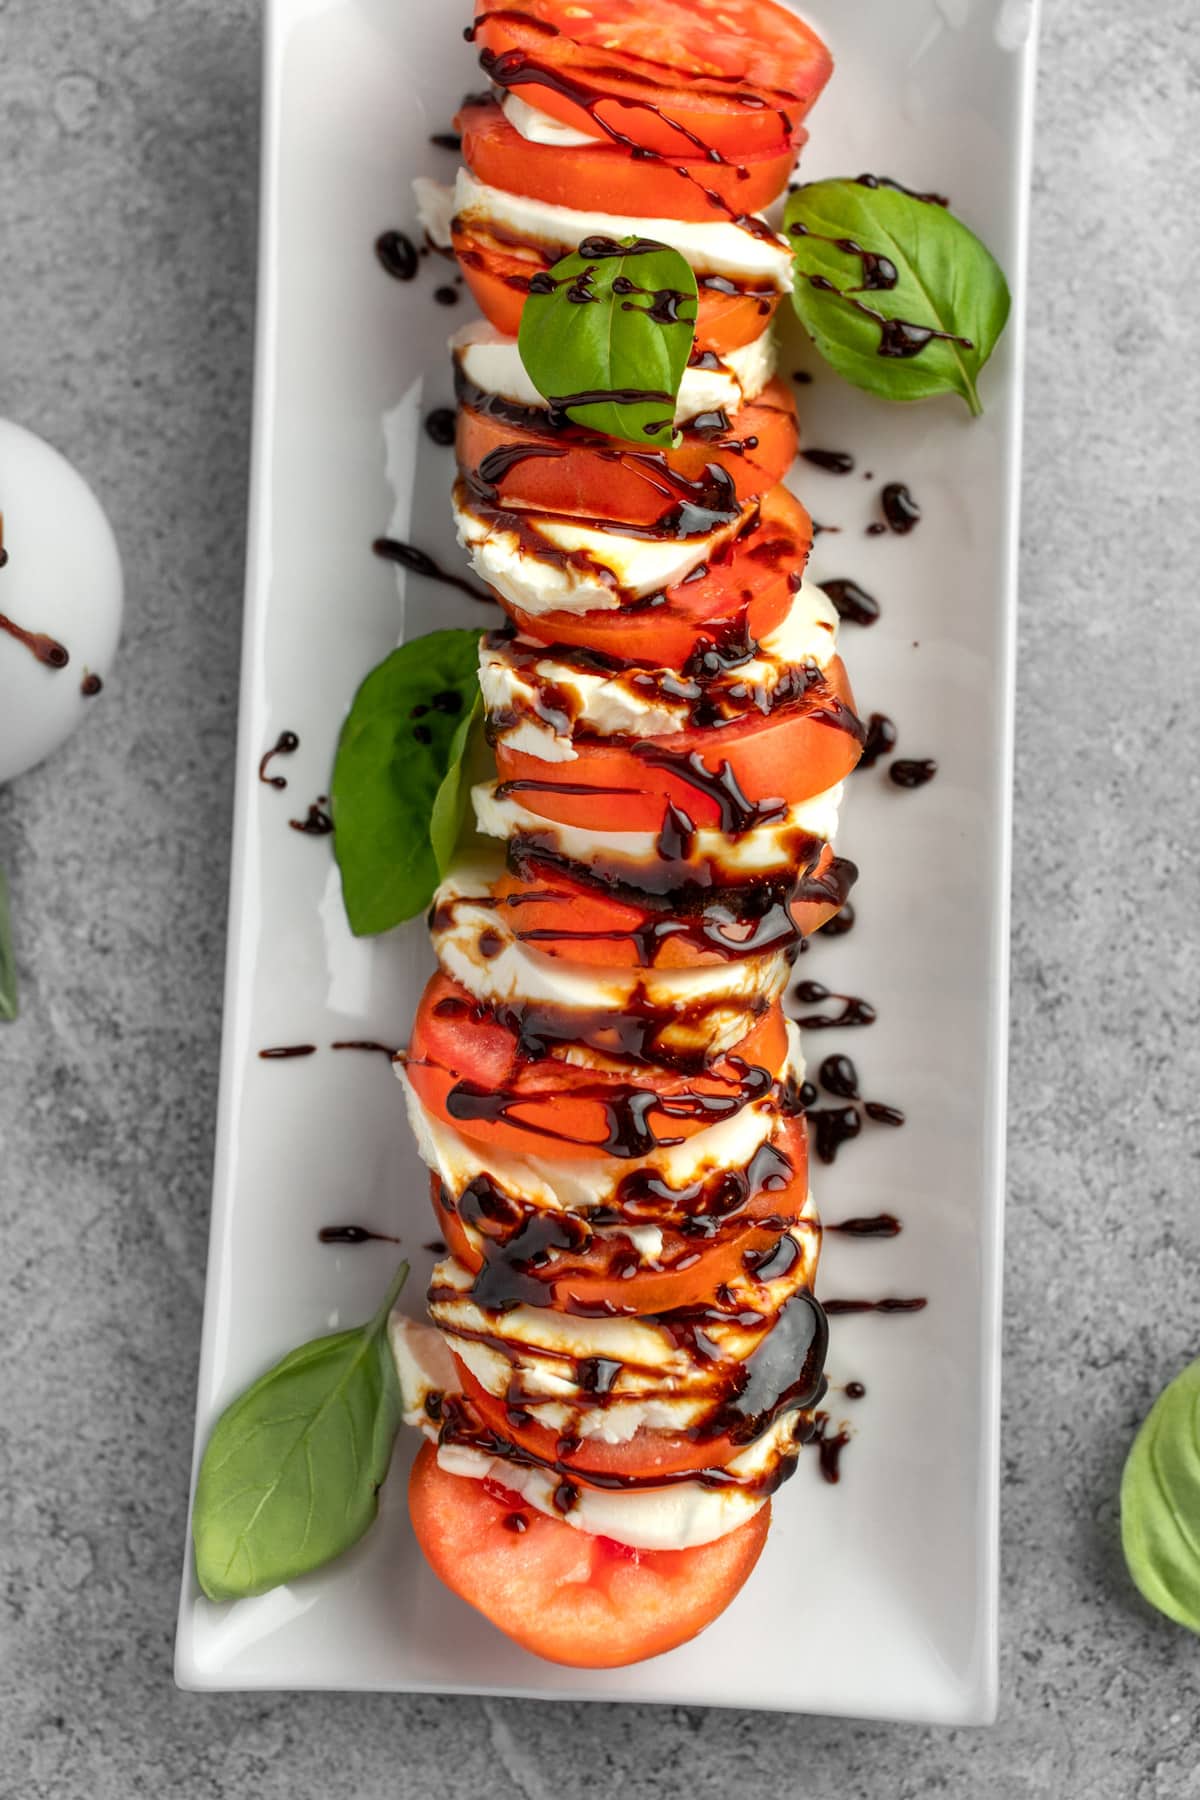 Caprese salad on a white rectangular plate, garnished with fresh basil leaves and drizzled with balsamic glaze.